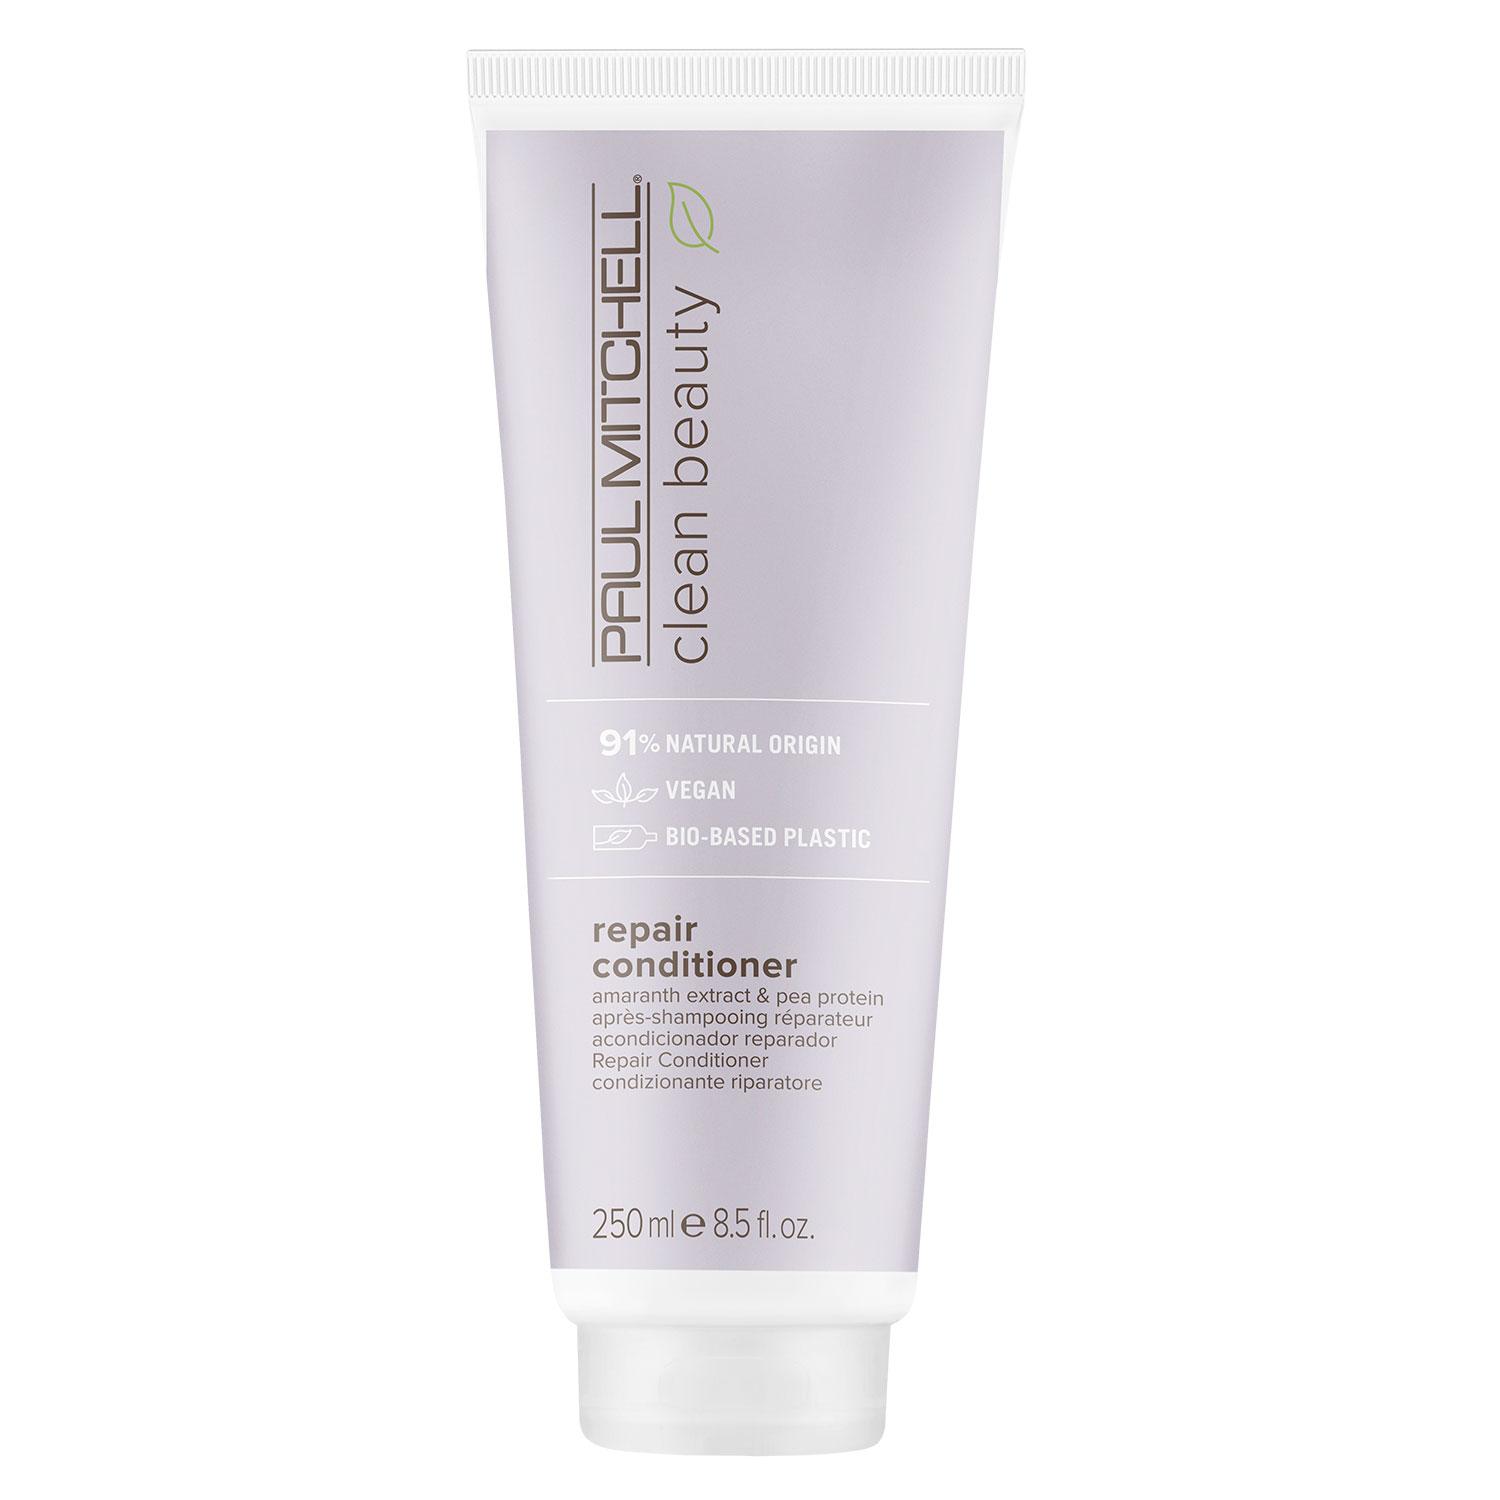 Paul Mitchell Clean Beauty - Repair Conditioner